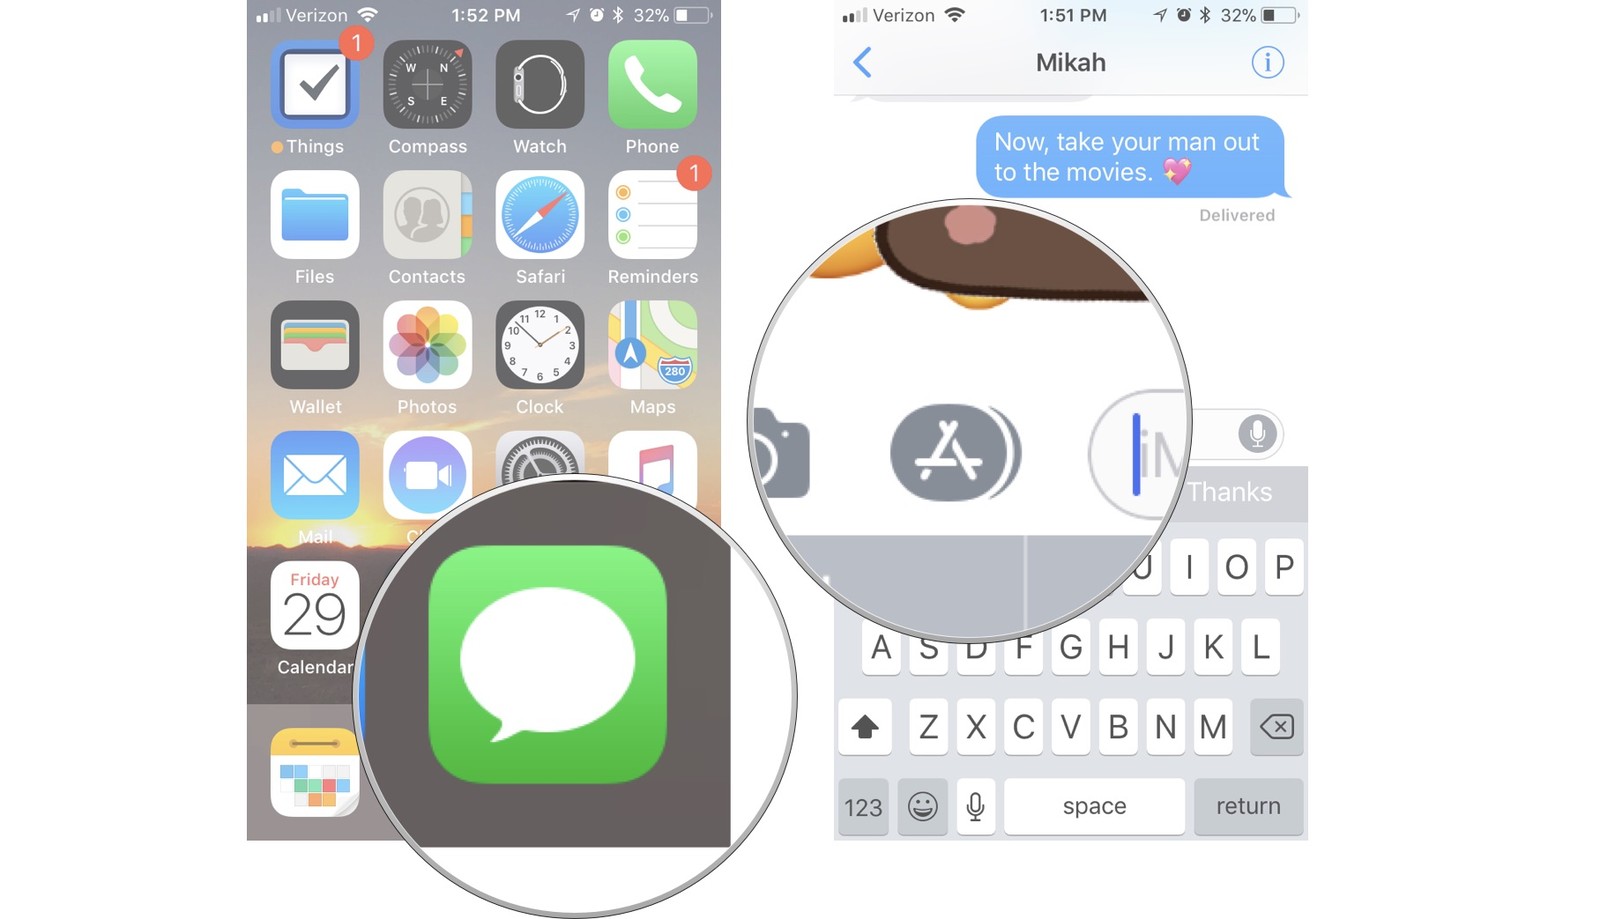 how to download imessage on mac